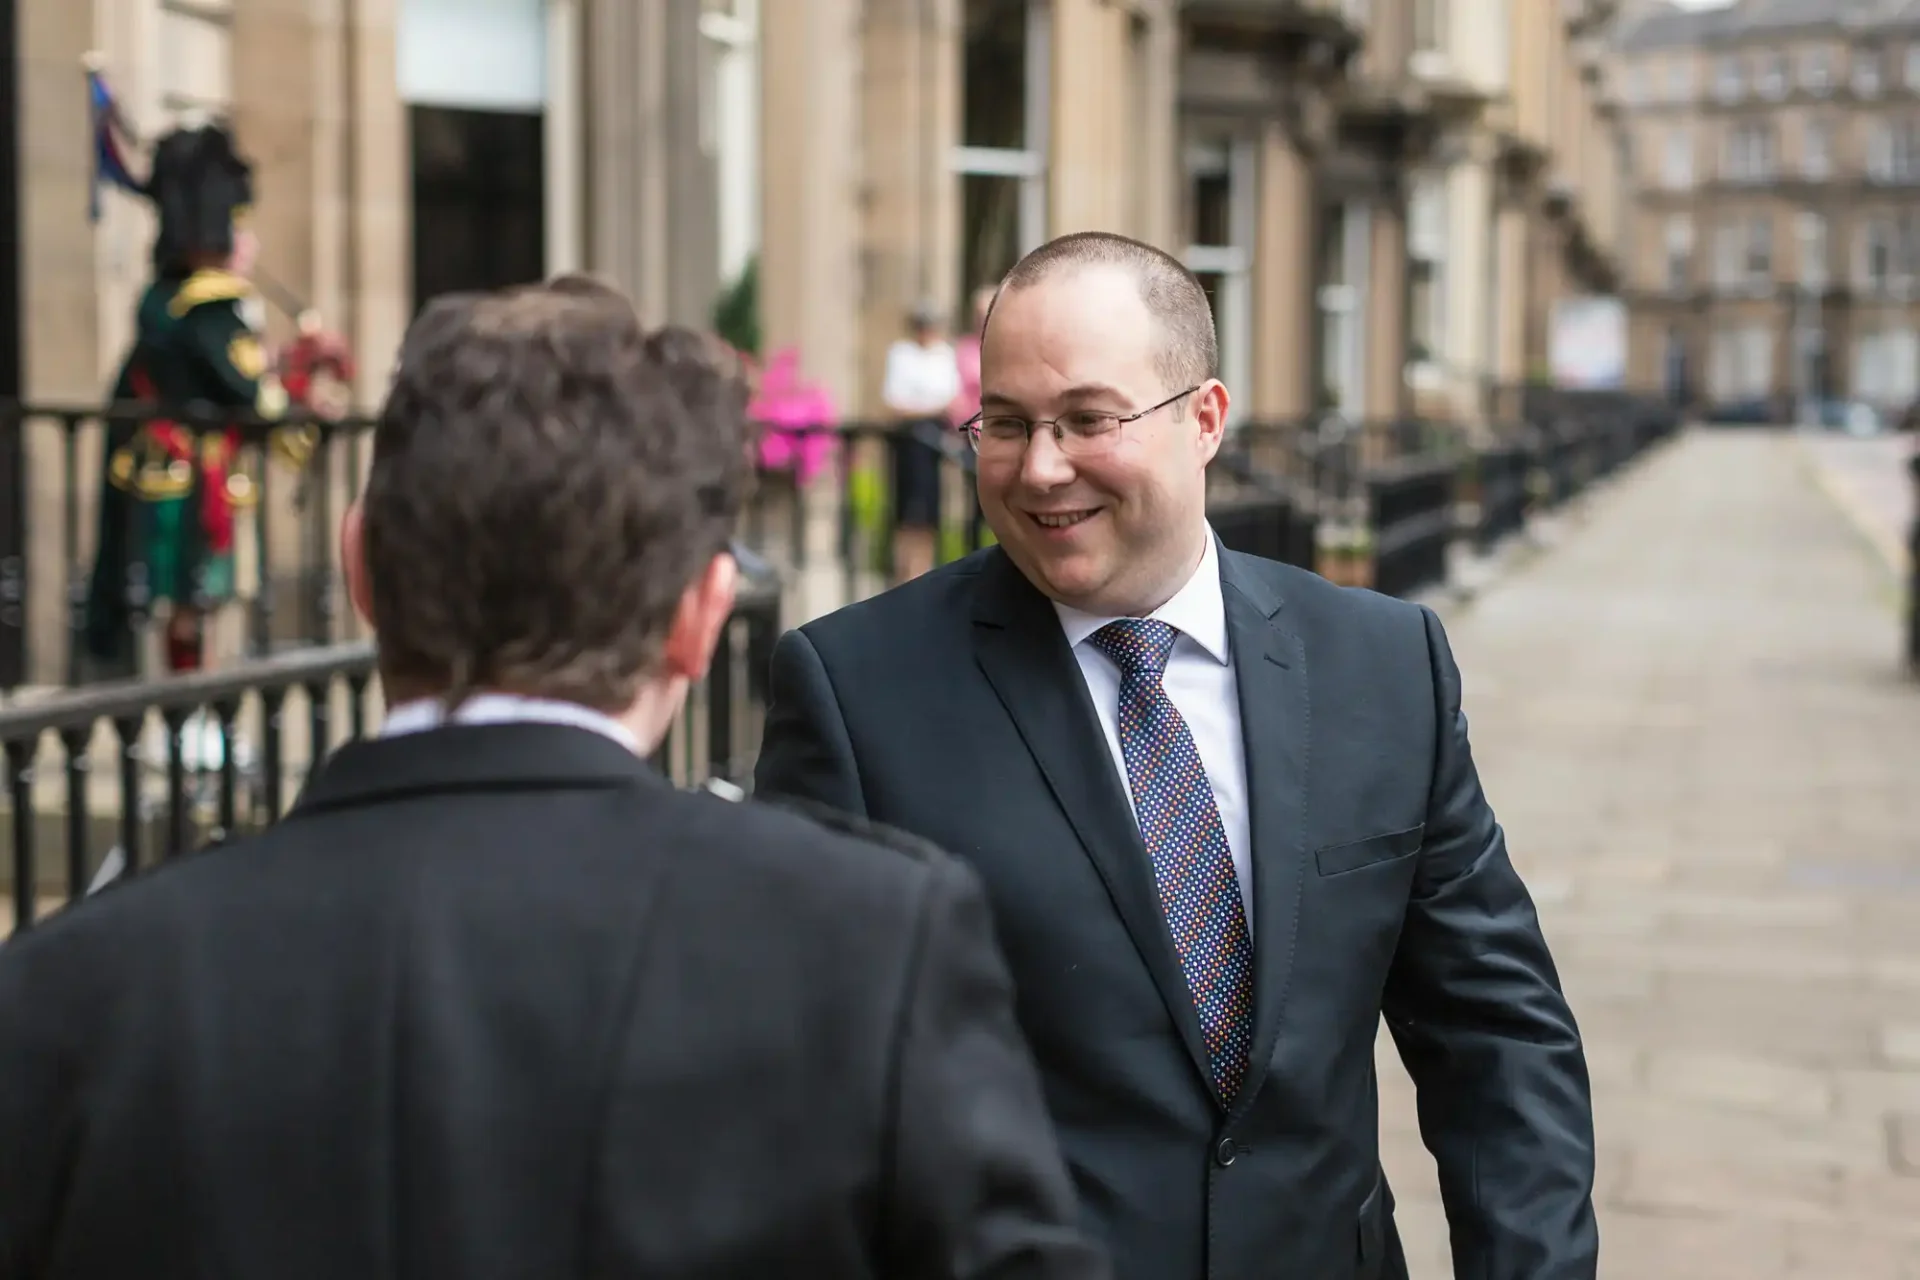 Two men in business suits engaged in a conversation on a city street, with one man facing the camera and smiling.